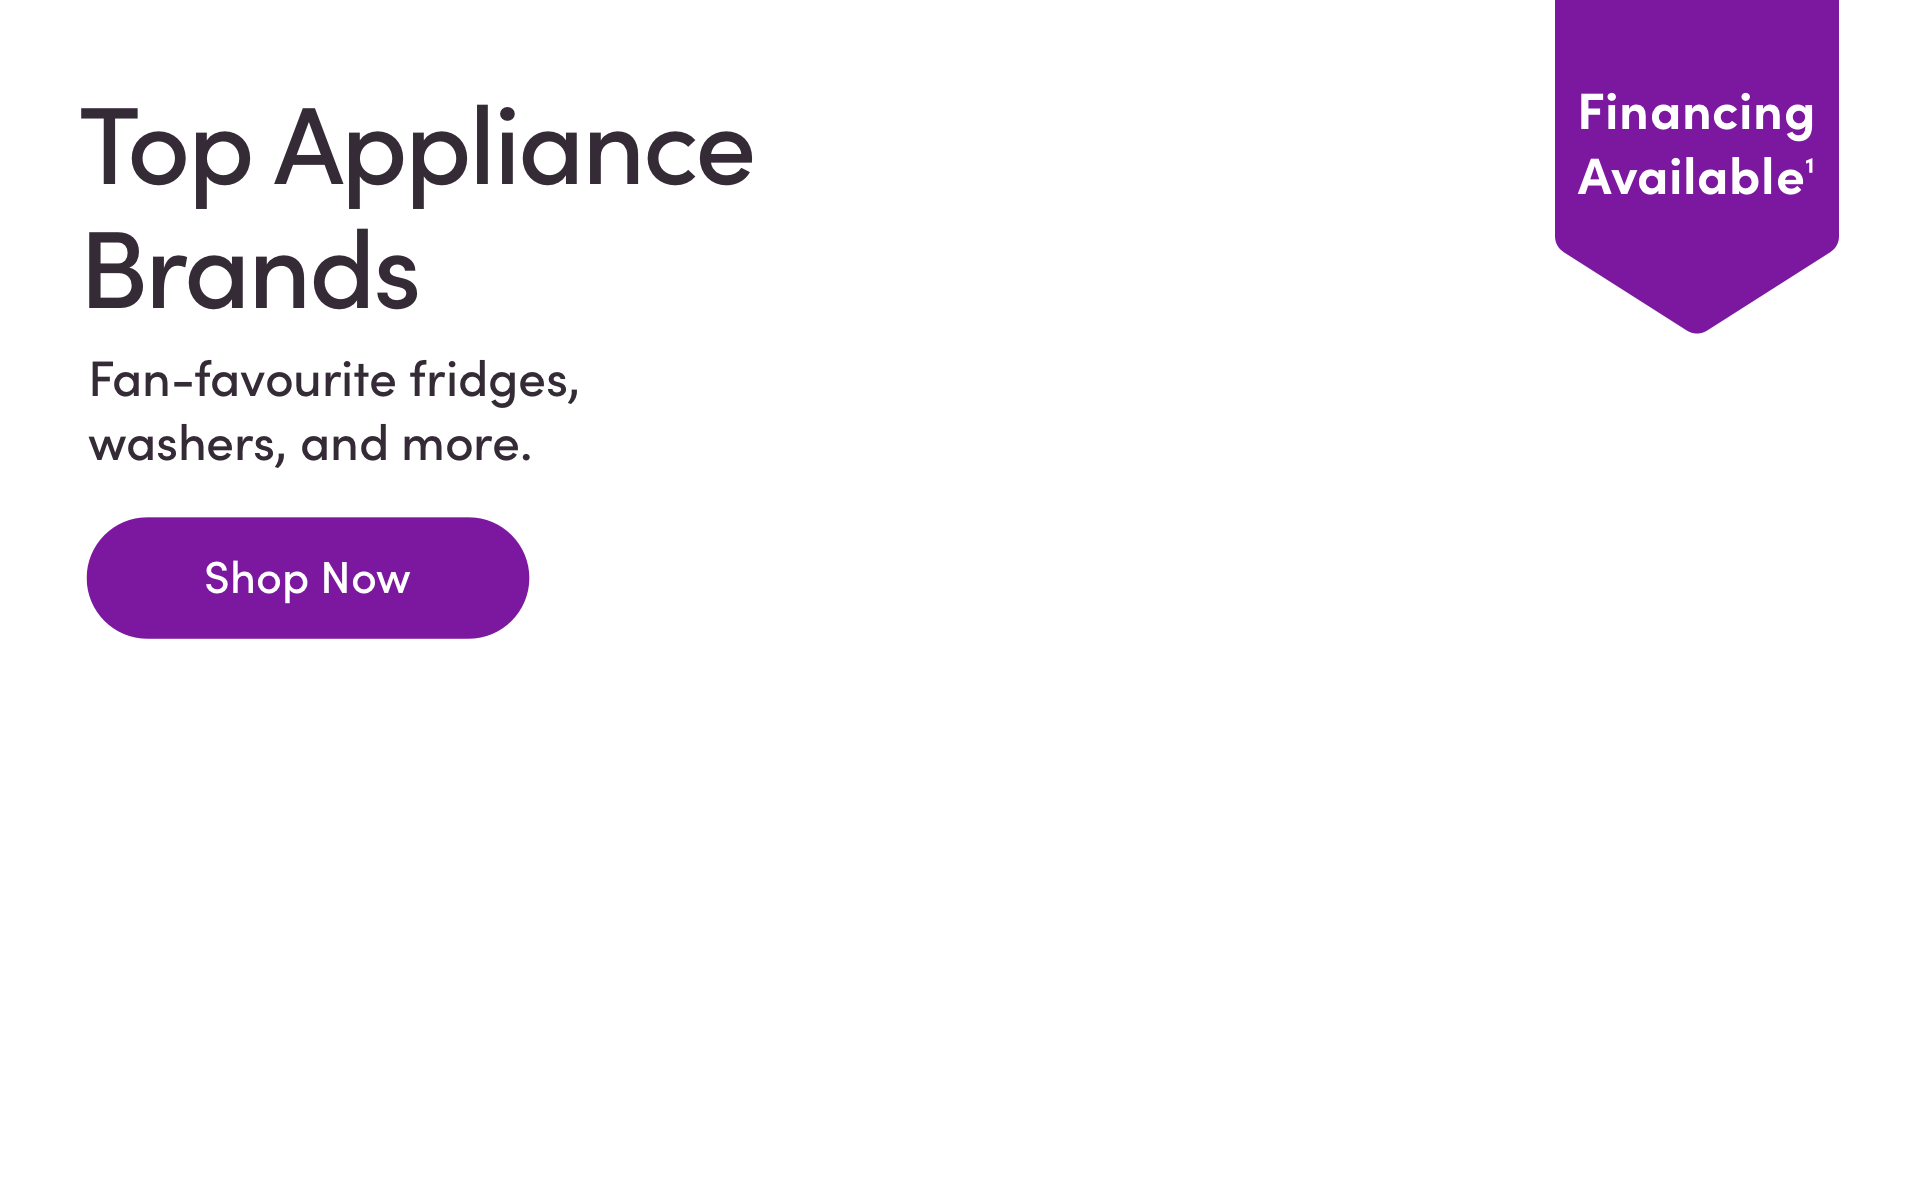 Financing Available. Top Appliance Brands. Fan-favourite fridges, washers, and more. Shop Now.